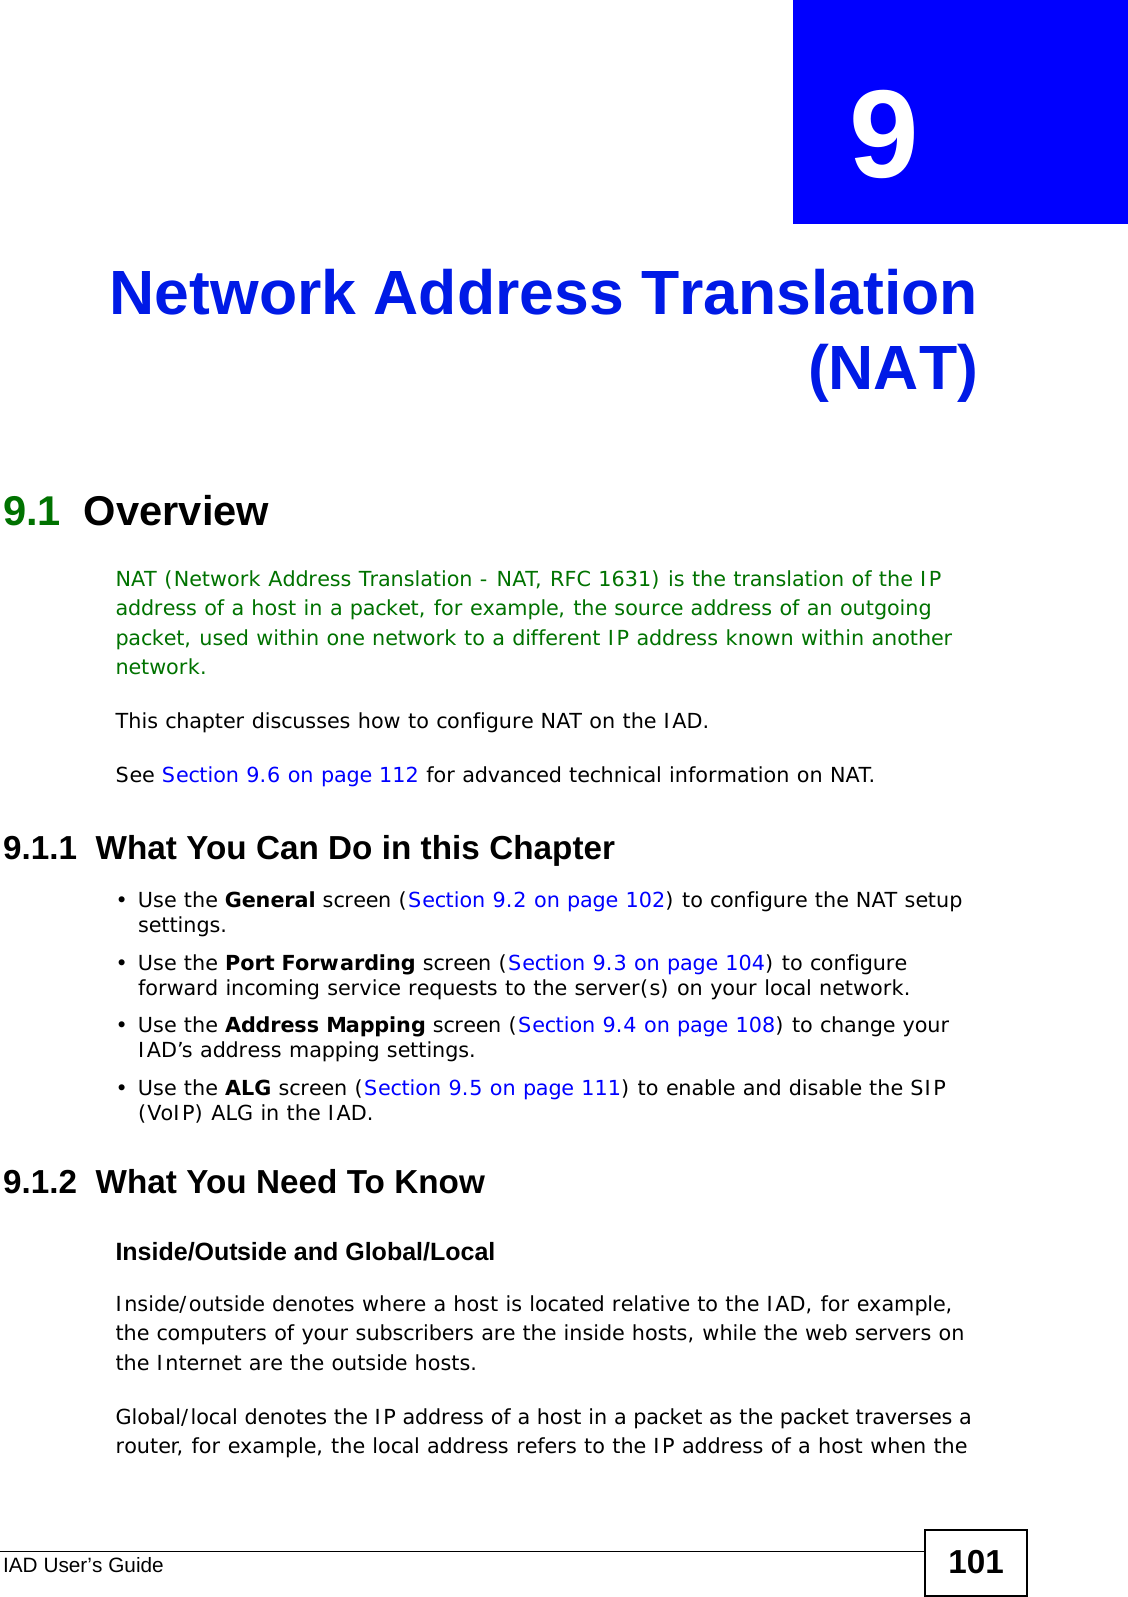 IAD User’s Guide 101CHAPTER  9 Network Address Translation(NAT)9.1  Overview NAT (Network Address Translation - NAT, RFC 1631) is the translation of the IP address of a host in a packet, for example, the source address of an outgoing packet, used within one network to a different IP address known within another network.This chapter discusses how to configure NAT on the IAD.See Section 9.6 on page 112 for advanced technical information on NAT.9.1.1  What You Can Do in this Chapter•Use the General screen (Section 9.2 on page 102) to configure the NAT setup settings.•Use the Port Forwarding screen (Section 9.3 on page 104) to configure forward incoming service requests to the server(s) on your local network. •Use the Address Mapping screen (Section 9.4 on page 108) to change your IAD’s address mapping settings.•Use the ALG screen (Section 9.5 on page 111) to enable and disable the SIP (VoIP) ALG in the IAD.9.1.2  What You Need To KnowInside/Outside and Global/LocalInside/outside denotes where a host is located relative to the IAD, for example, the computers of your subscribers are the inside hosts, while the web servers on the Internet are the outside hosts. Global/local denotes the IP address of a host in a packet as the packet traverses a router, for example, the local address refers to the IP address of a host when the 